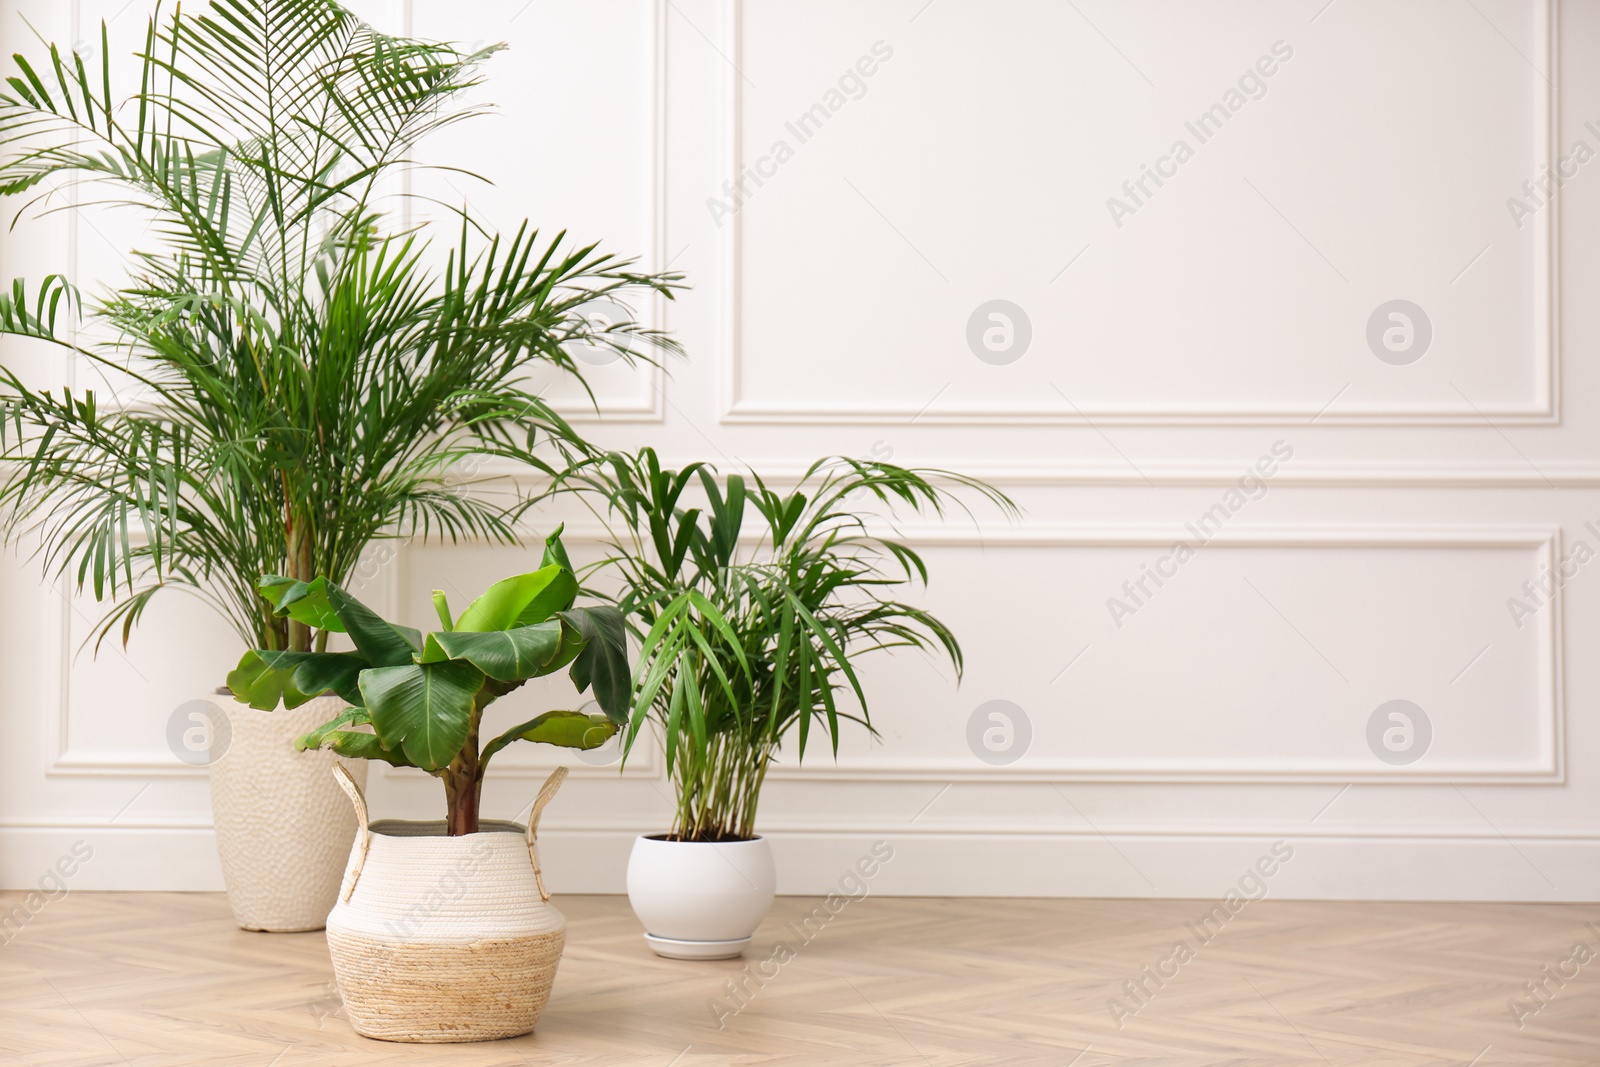 Photo of Different beautiful indoor plants on floor in room, space for text. House decoration